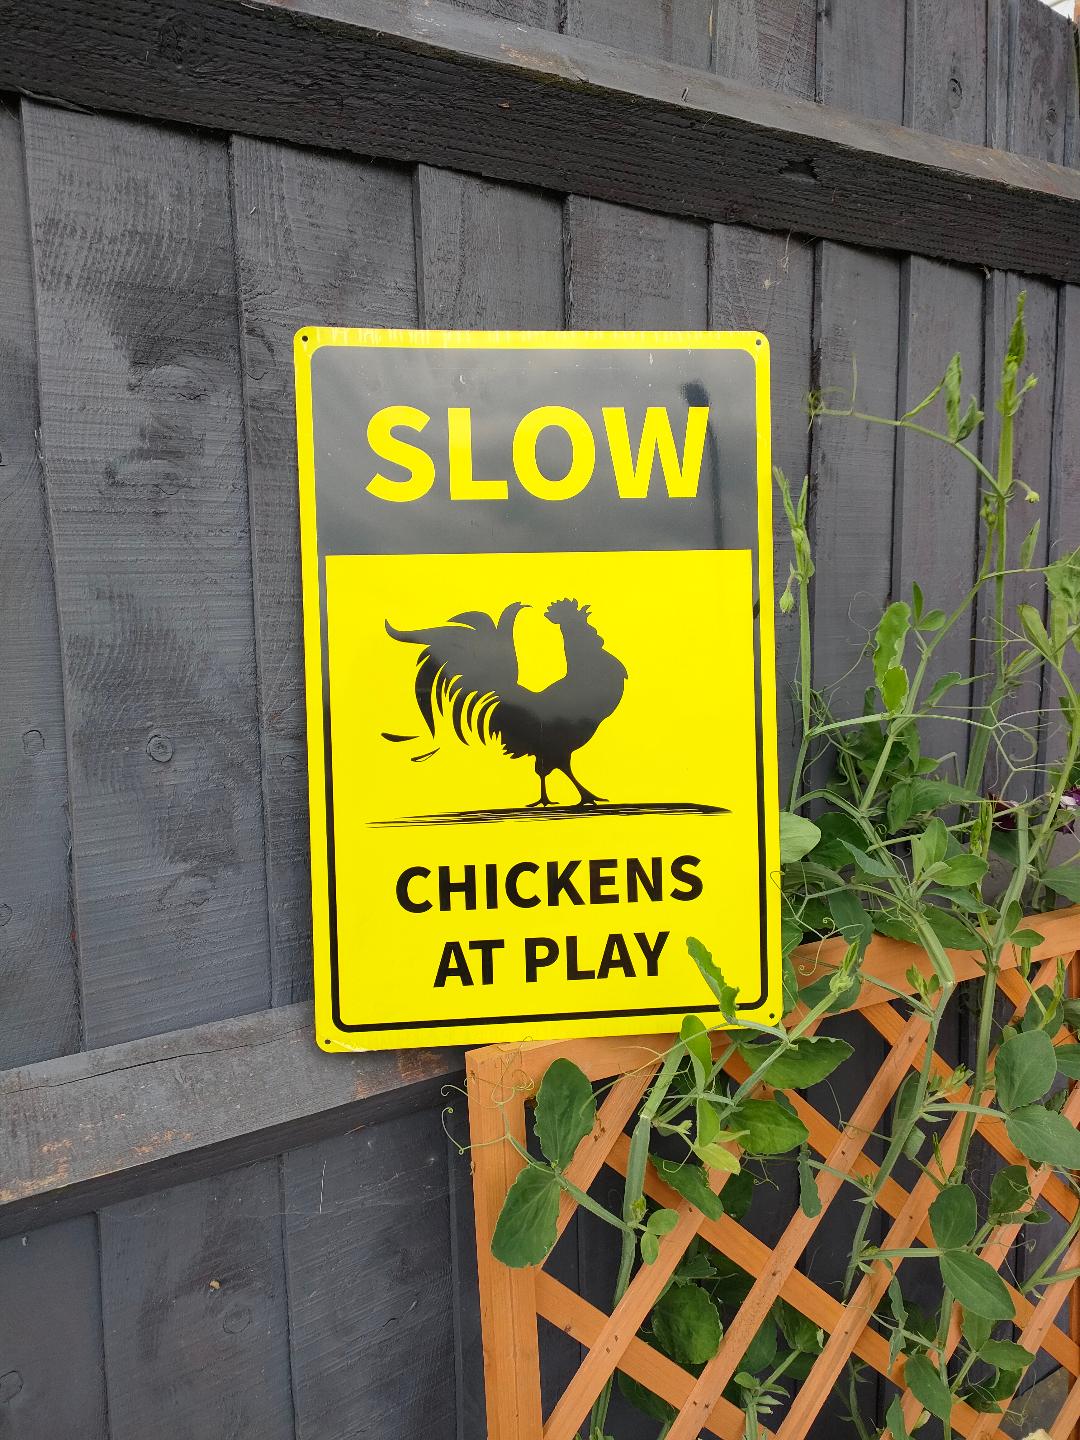 SLOW CHICKENS AT PLAY. Sign for garden gates, fences or posts.